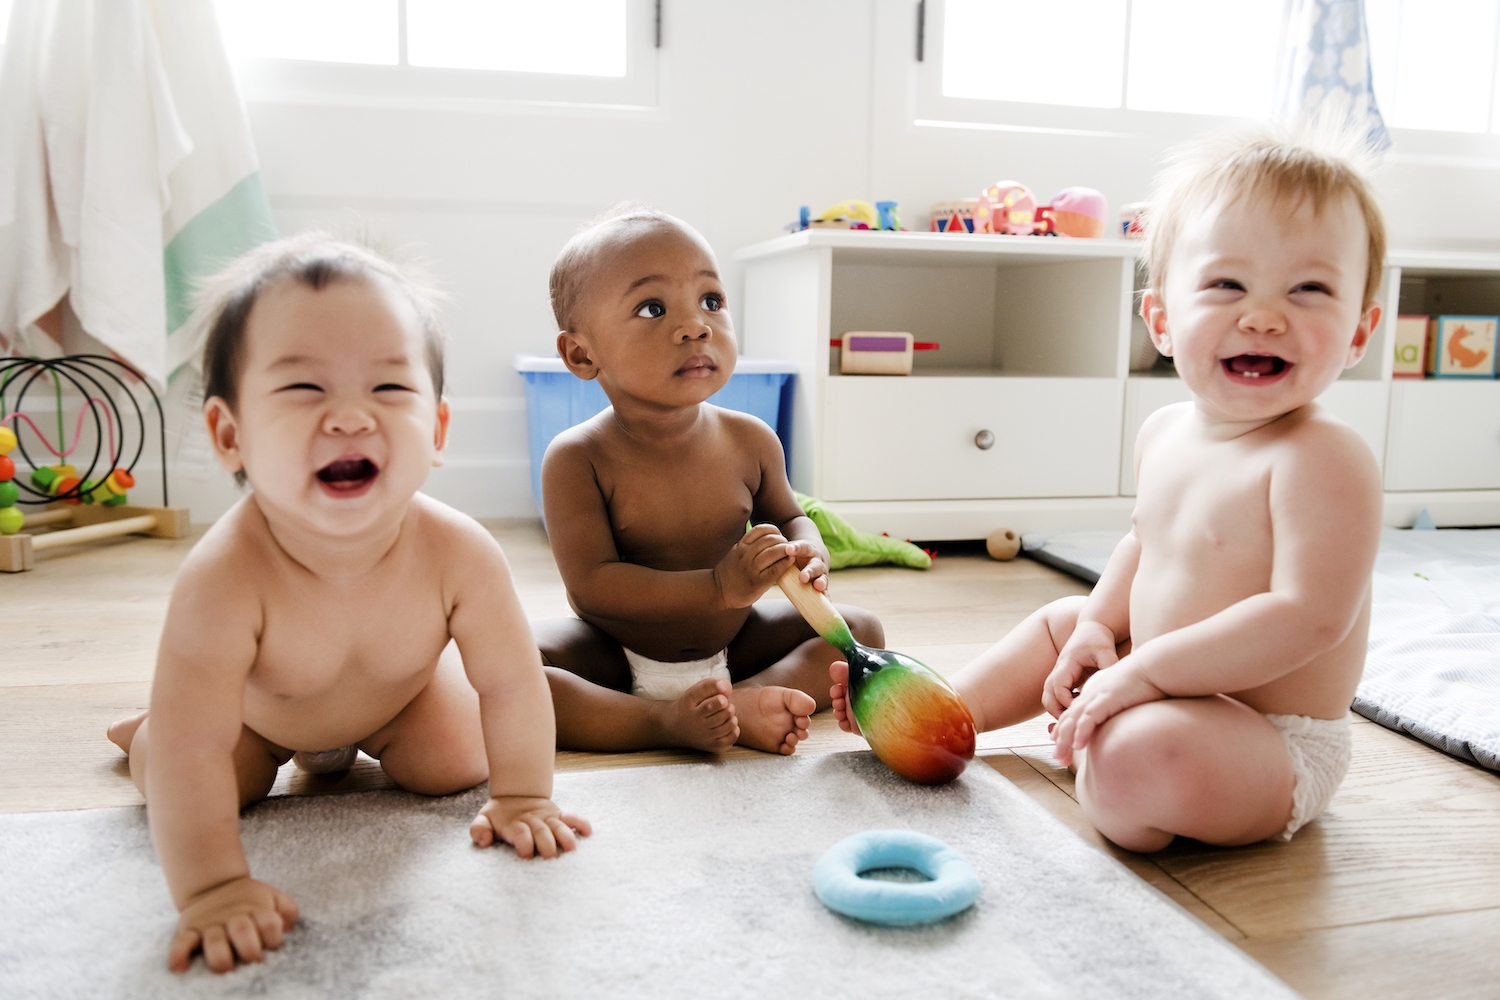 3 teething babies in their diapers smile as they play together on the floor with toys